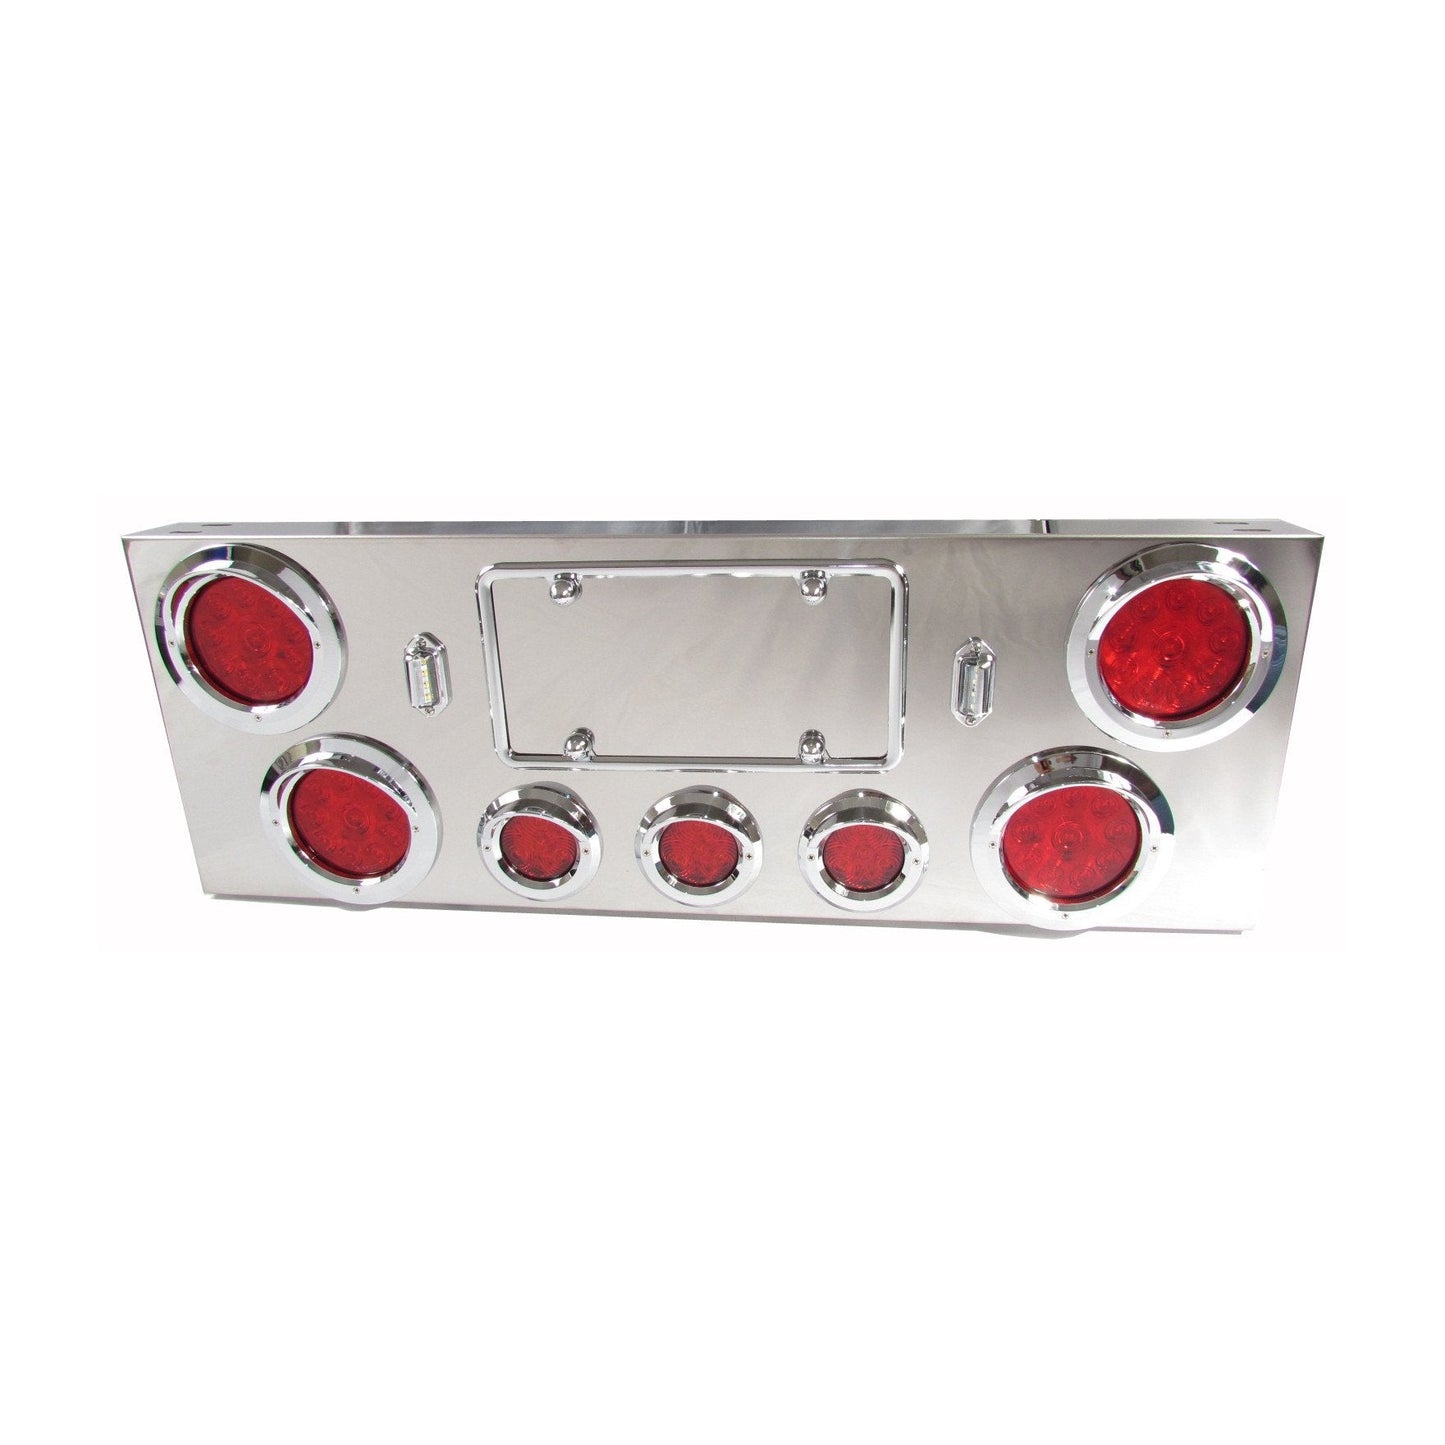 Stainless Steel Rear Center Panel With Red Led Lights | F235298